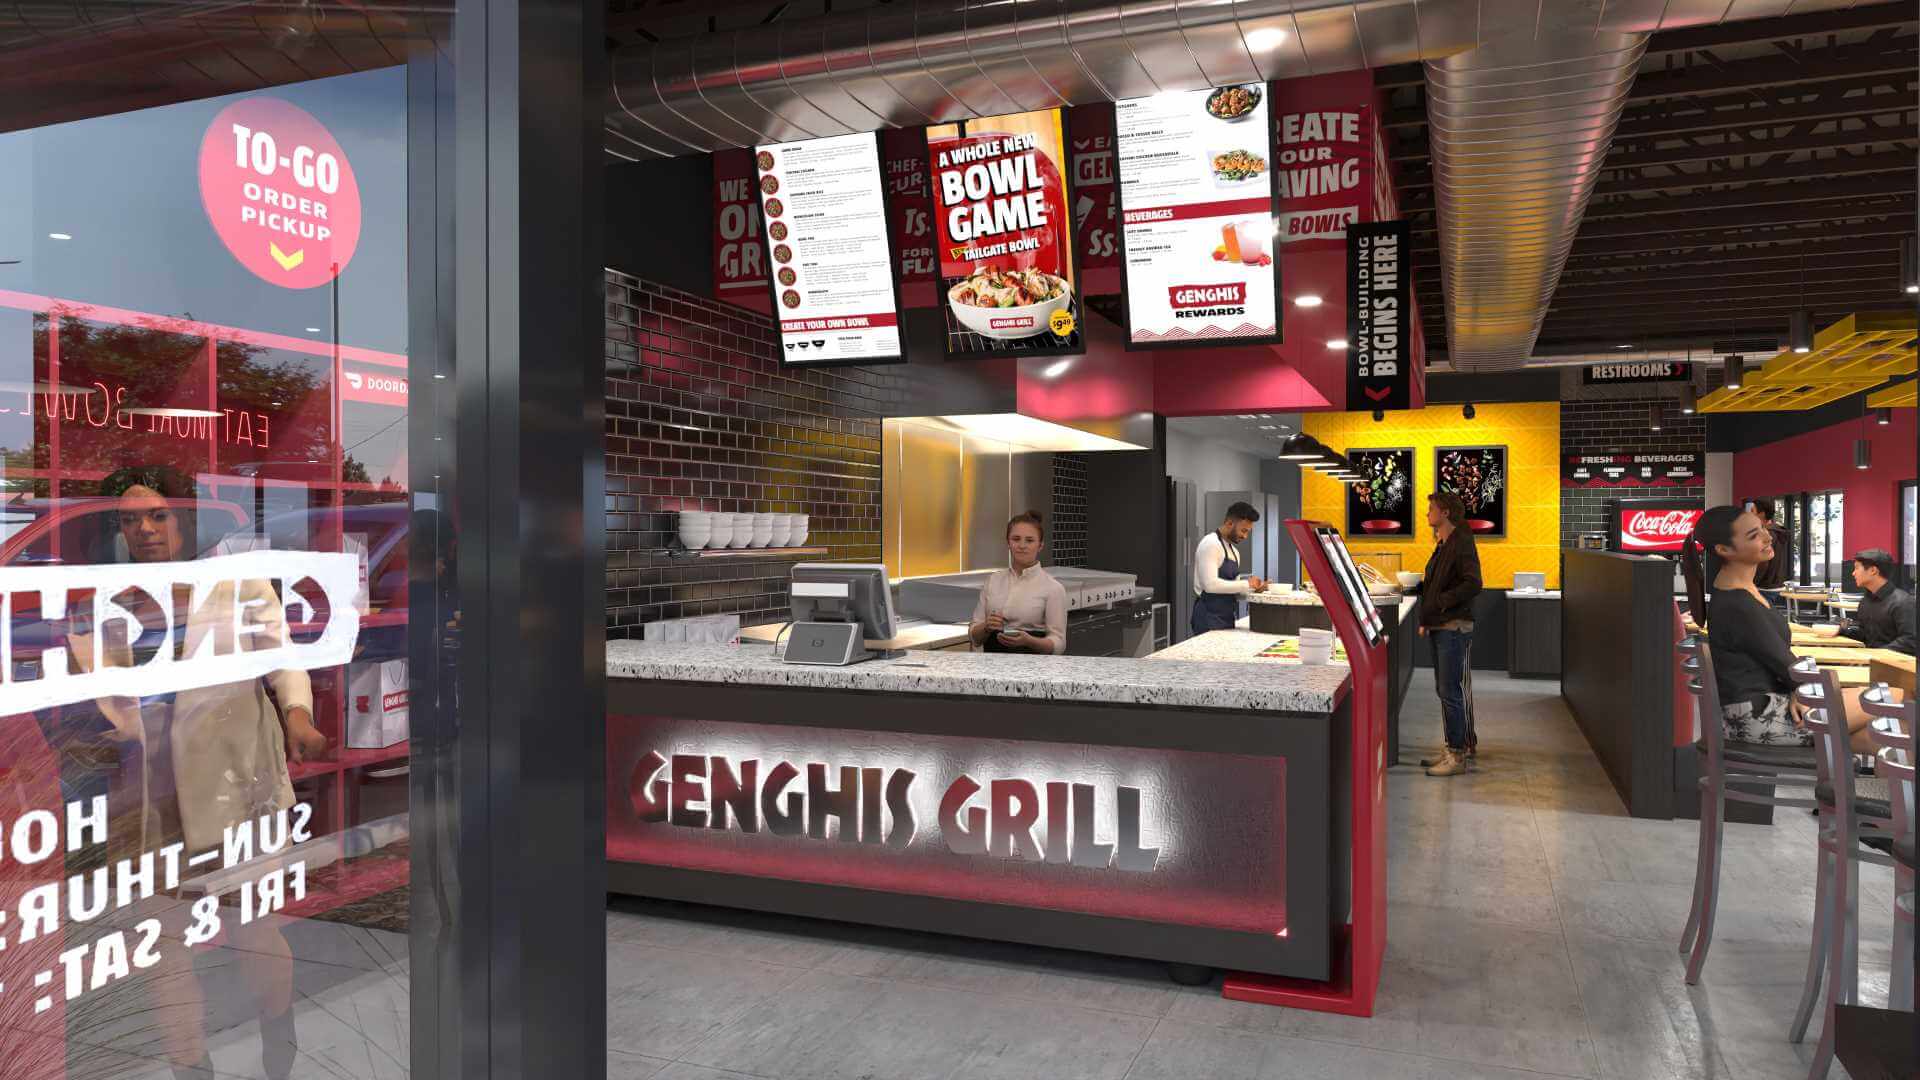 Genghis Grill Restaurant